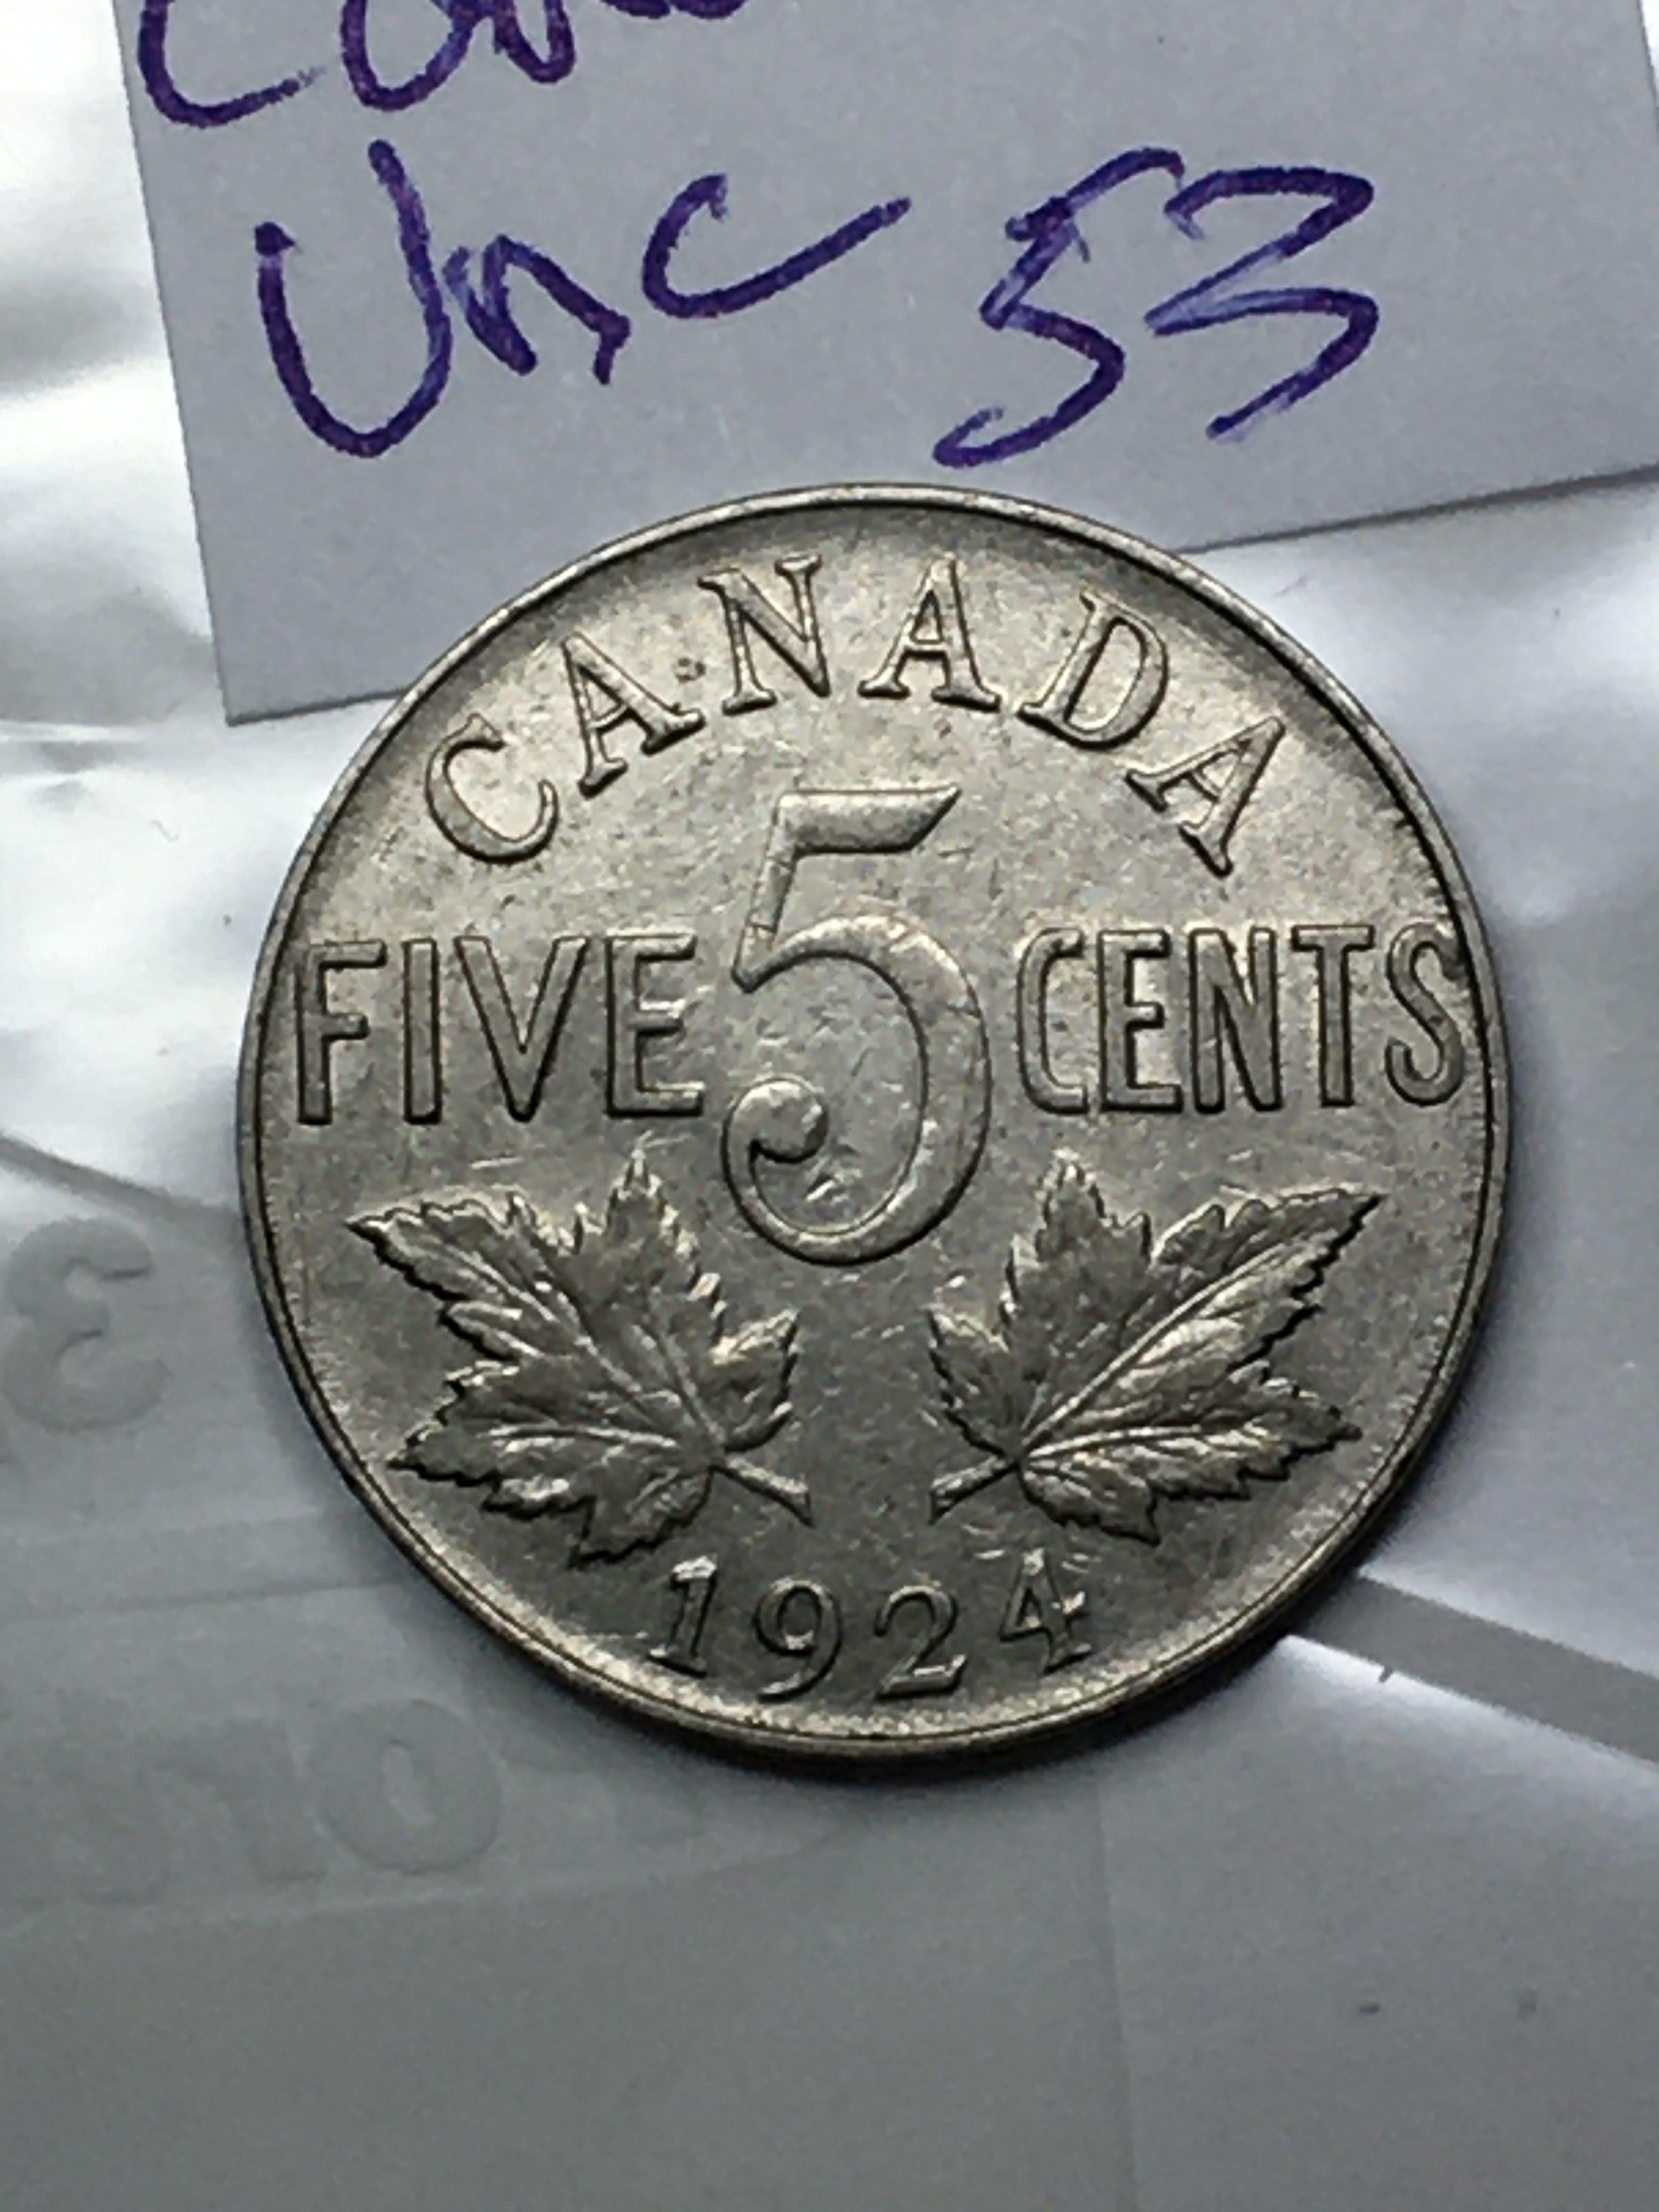 1924 Canadian 5 Cent